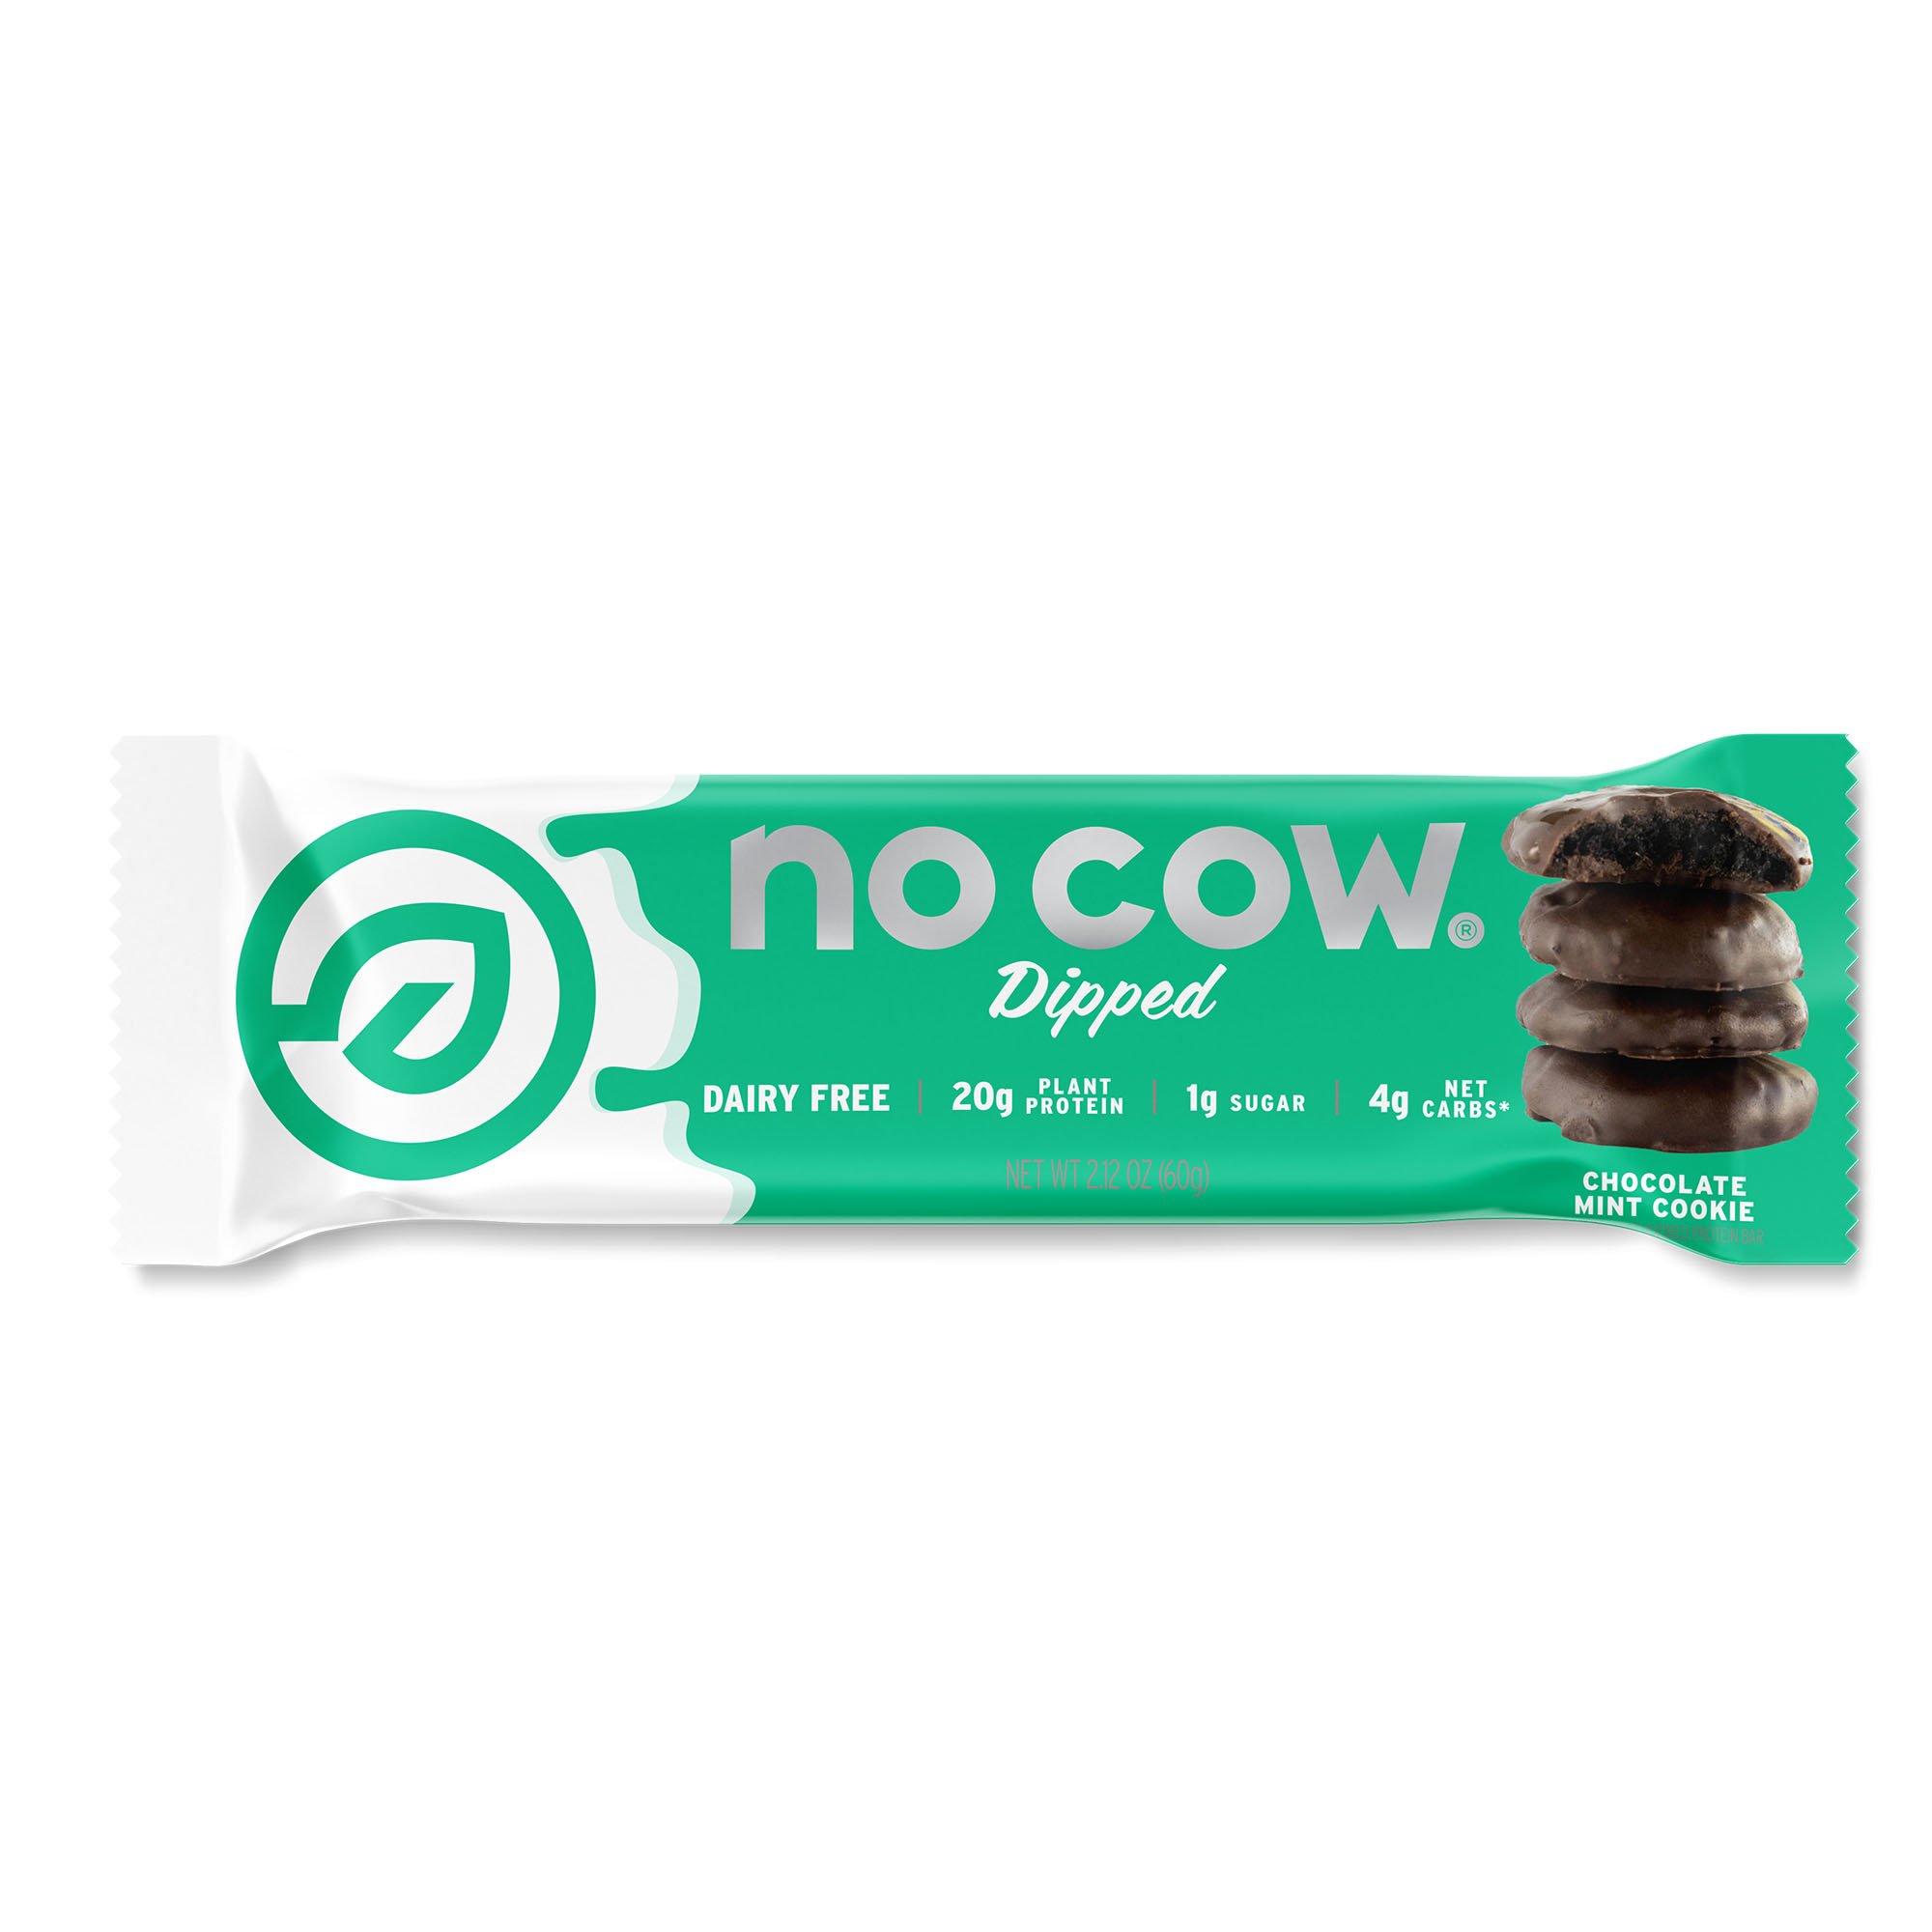 No Cow Dipped 20g Protein Bar Chocolate Mint Cookie Shop Granola